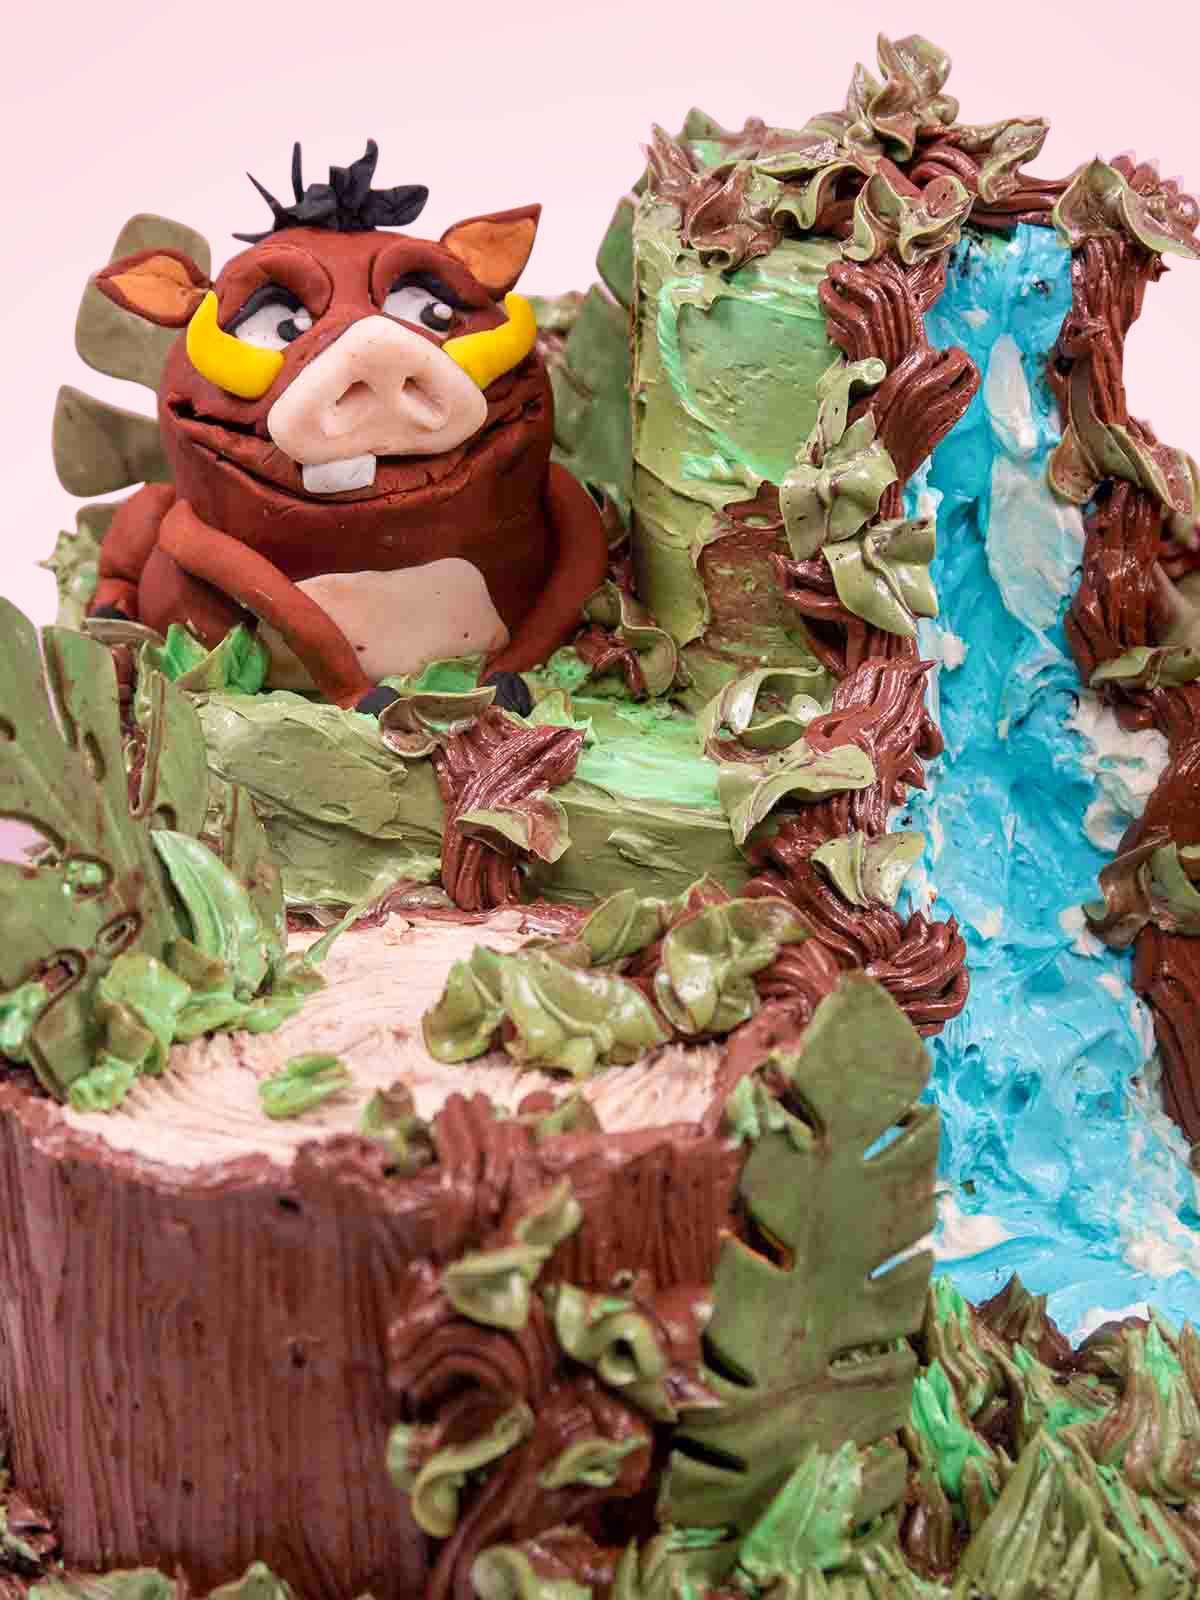 Lion Birthday Cake (How to Make) | Decorated Treats